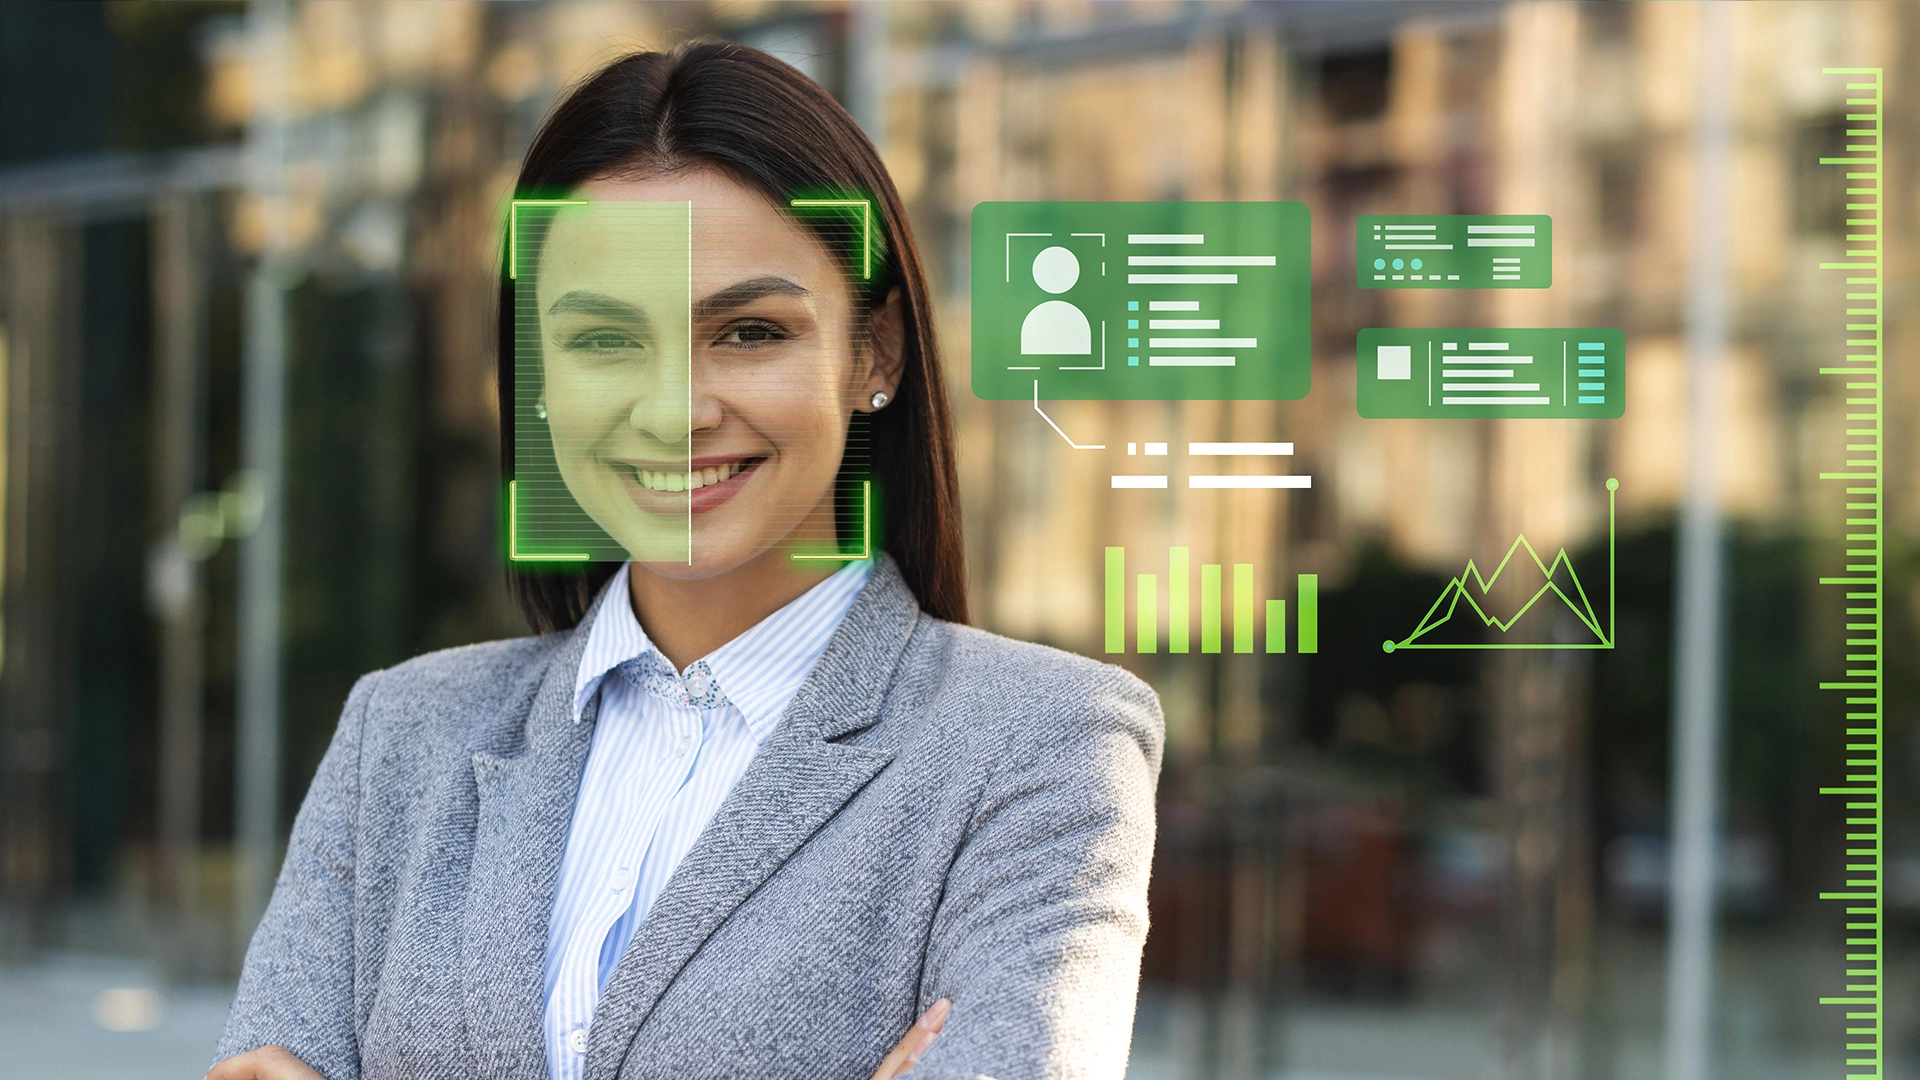 How Is Artificial Intelligence Changing the Recruiting Process